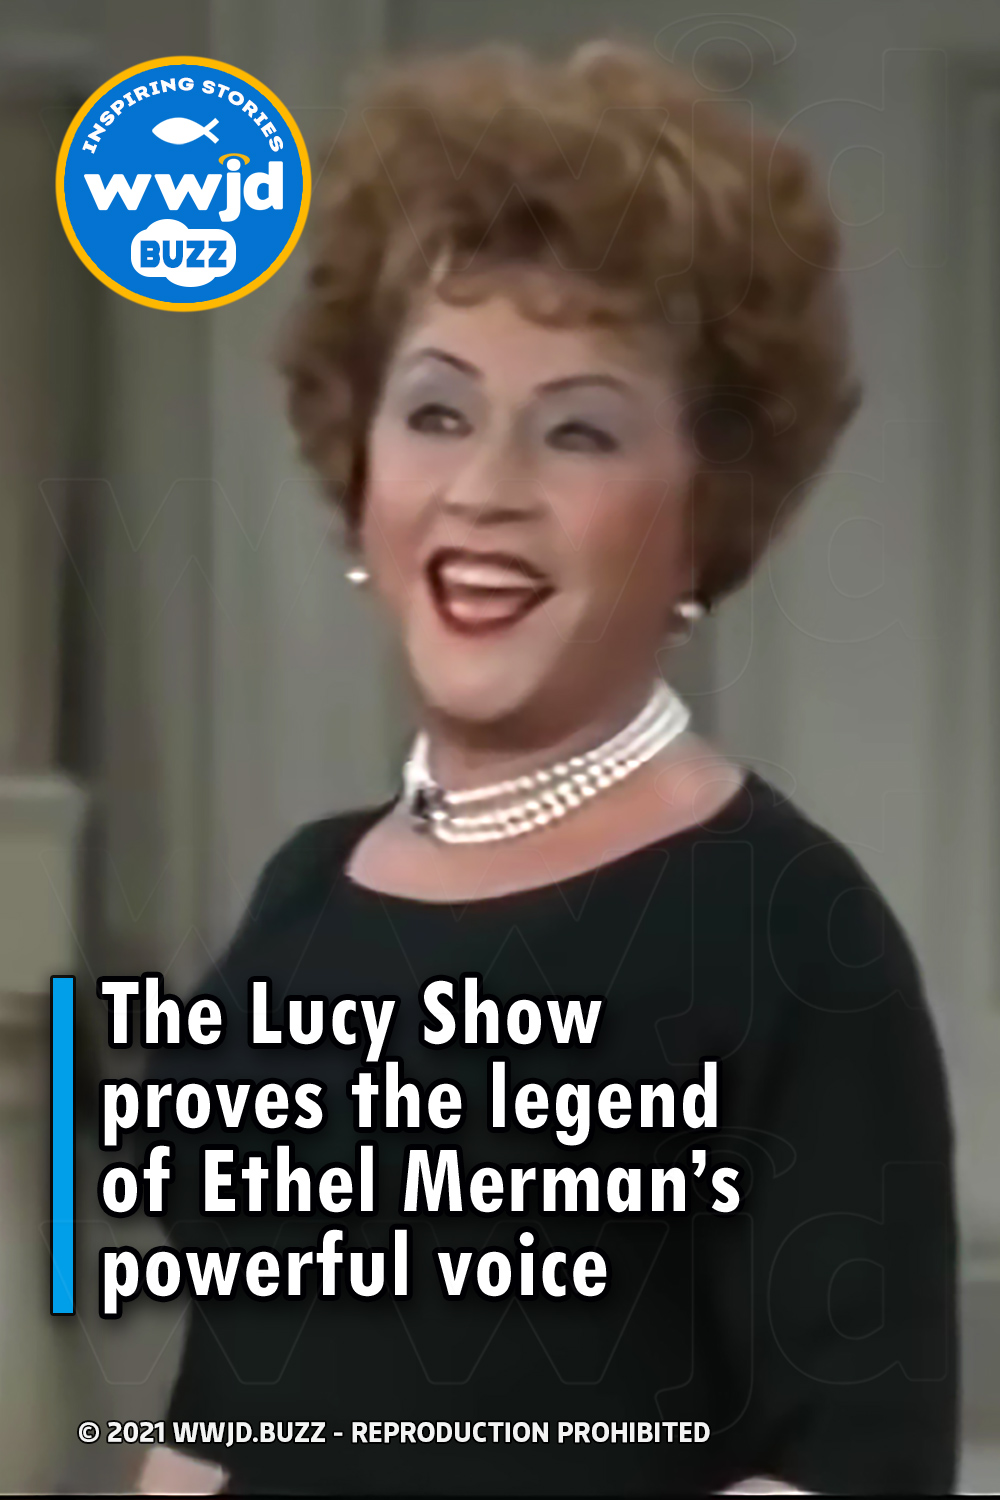 The Lucy Show proves the legend of Ethel Merman’s powerful voice